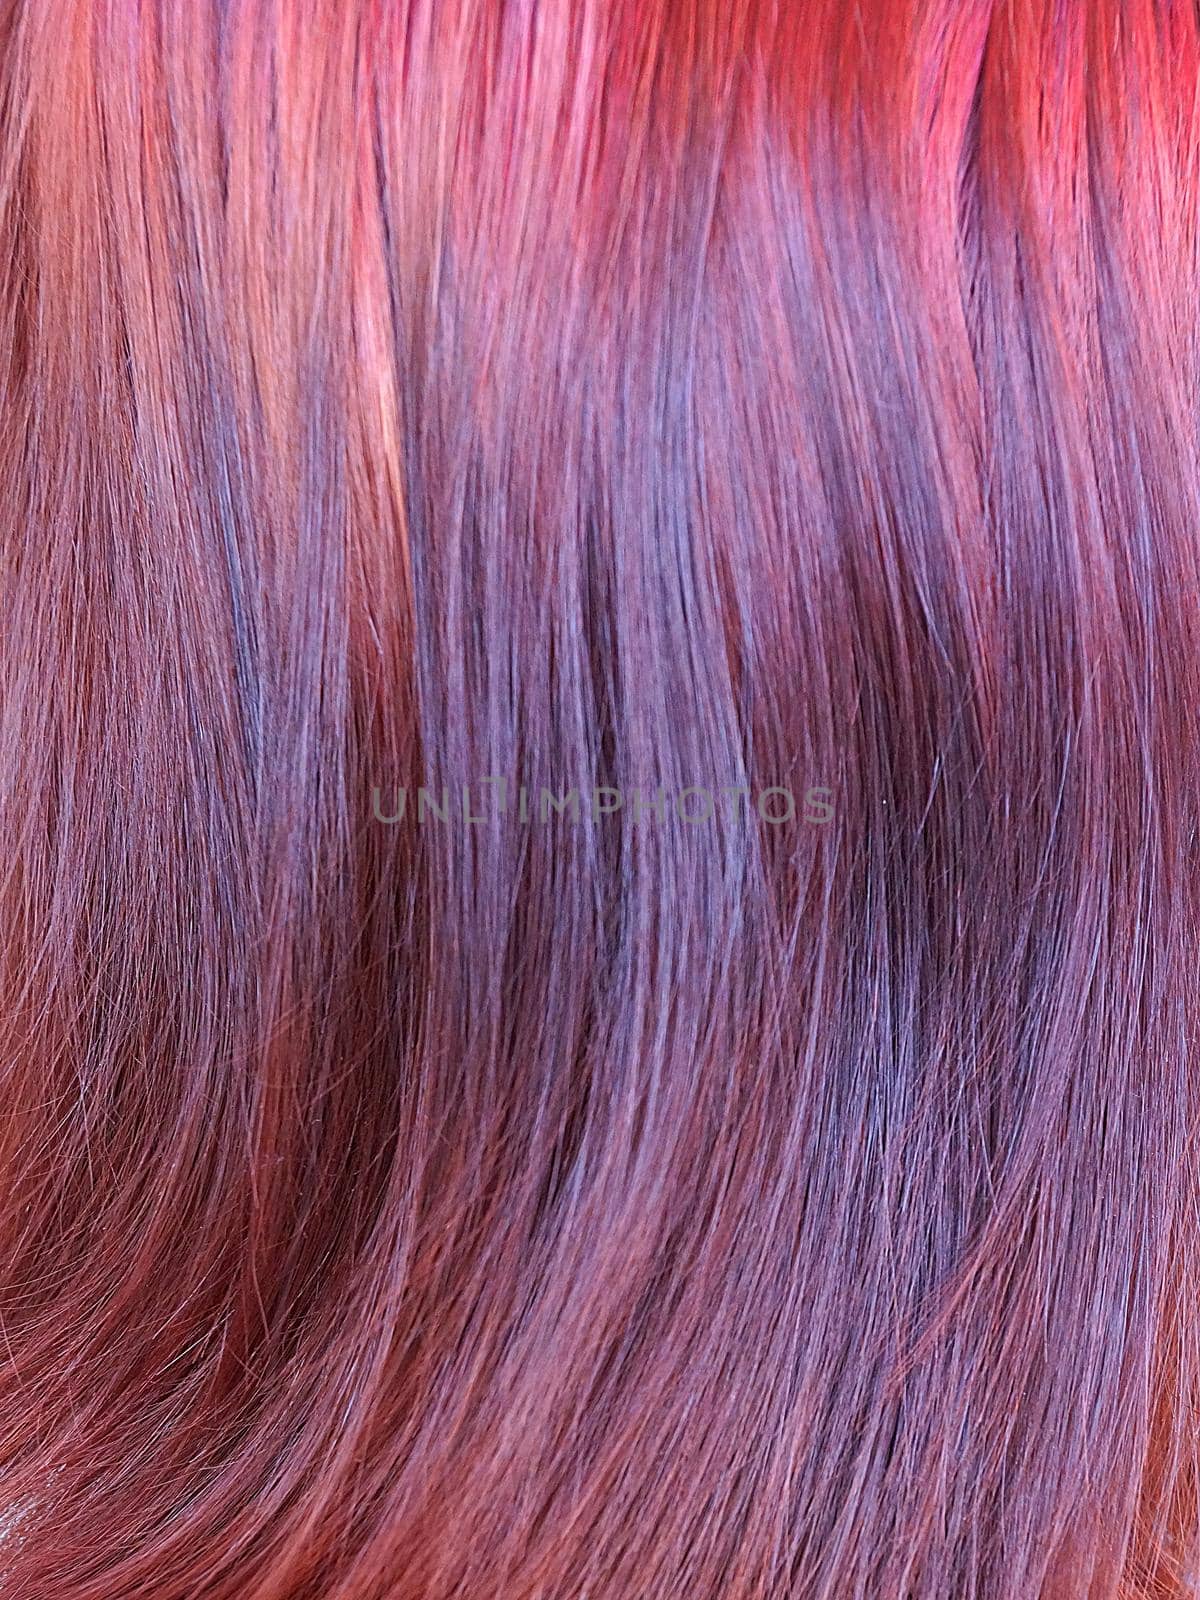 dyed red female hair closeup, texture for background by Annado